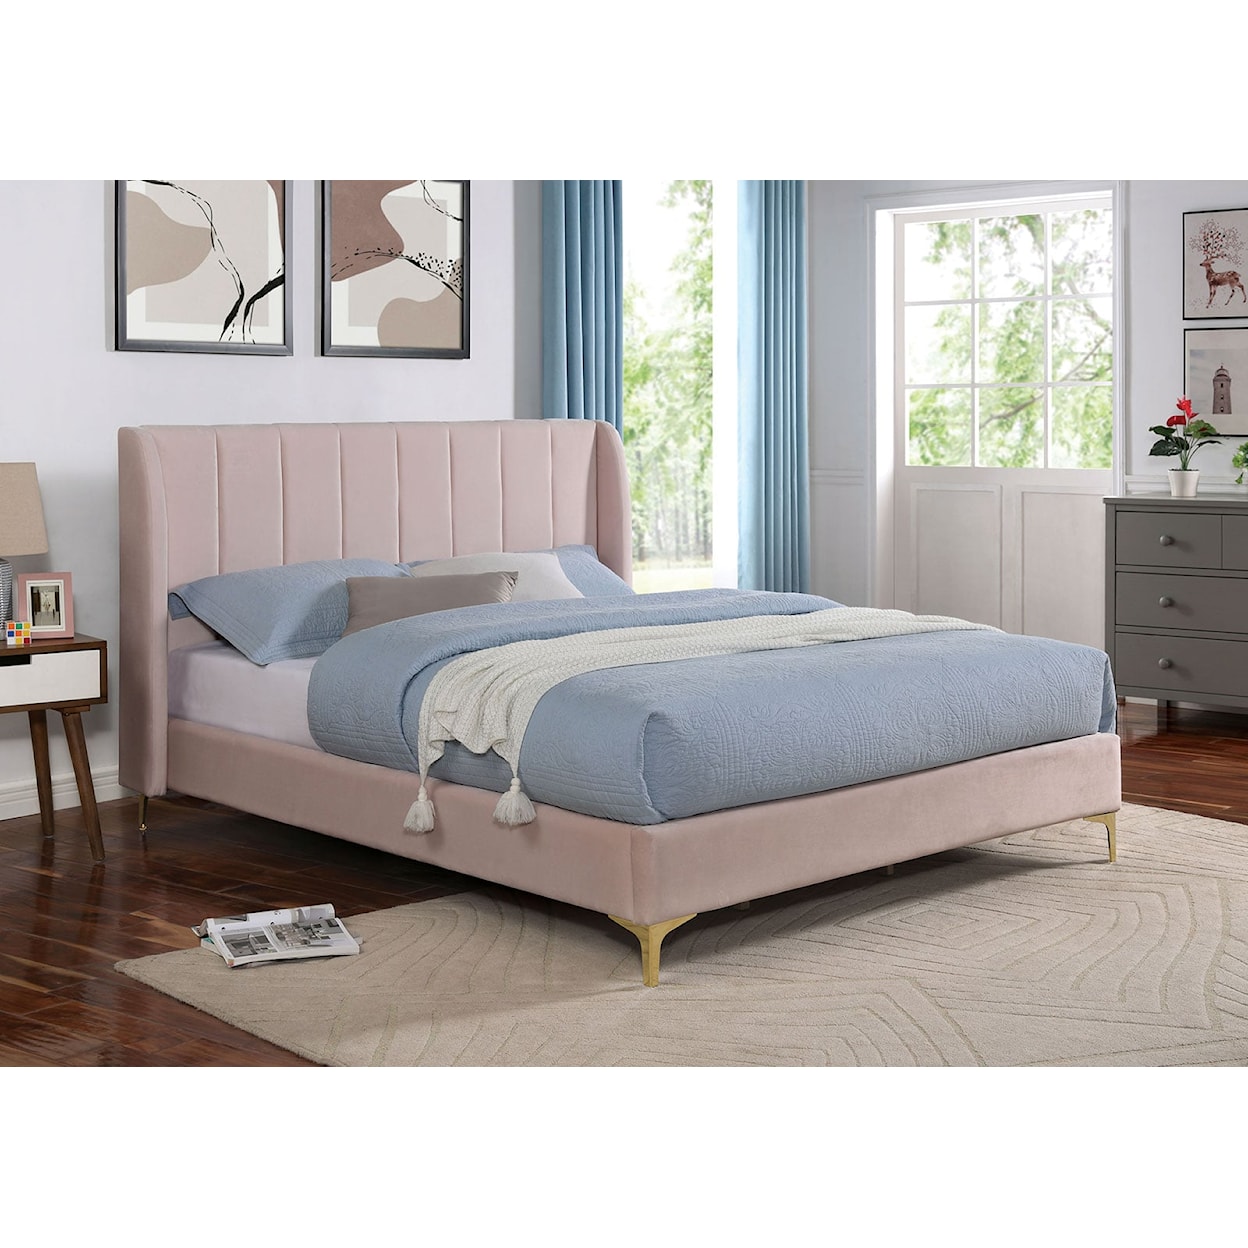 Furniture of America Pearl Full Upholstered Bed